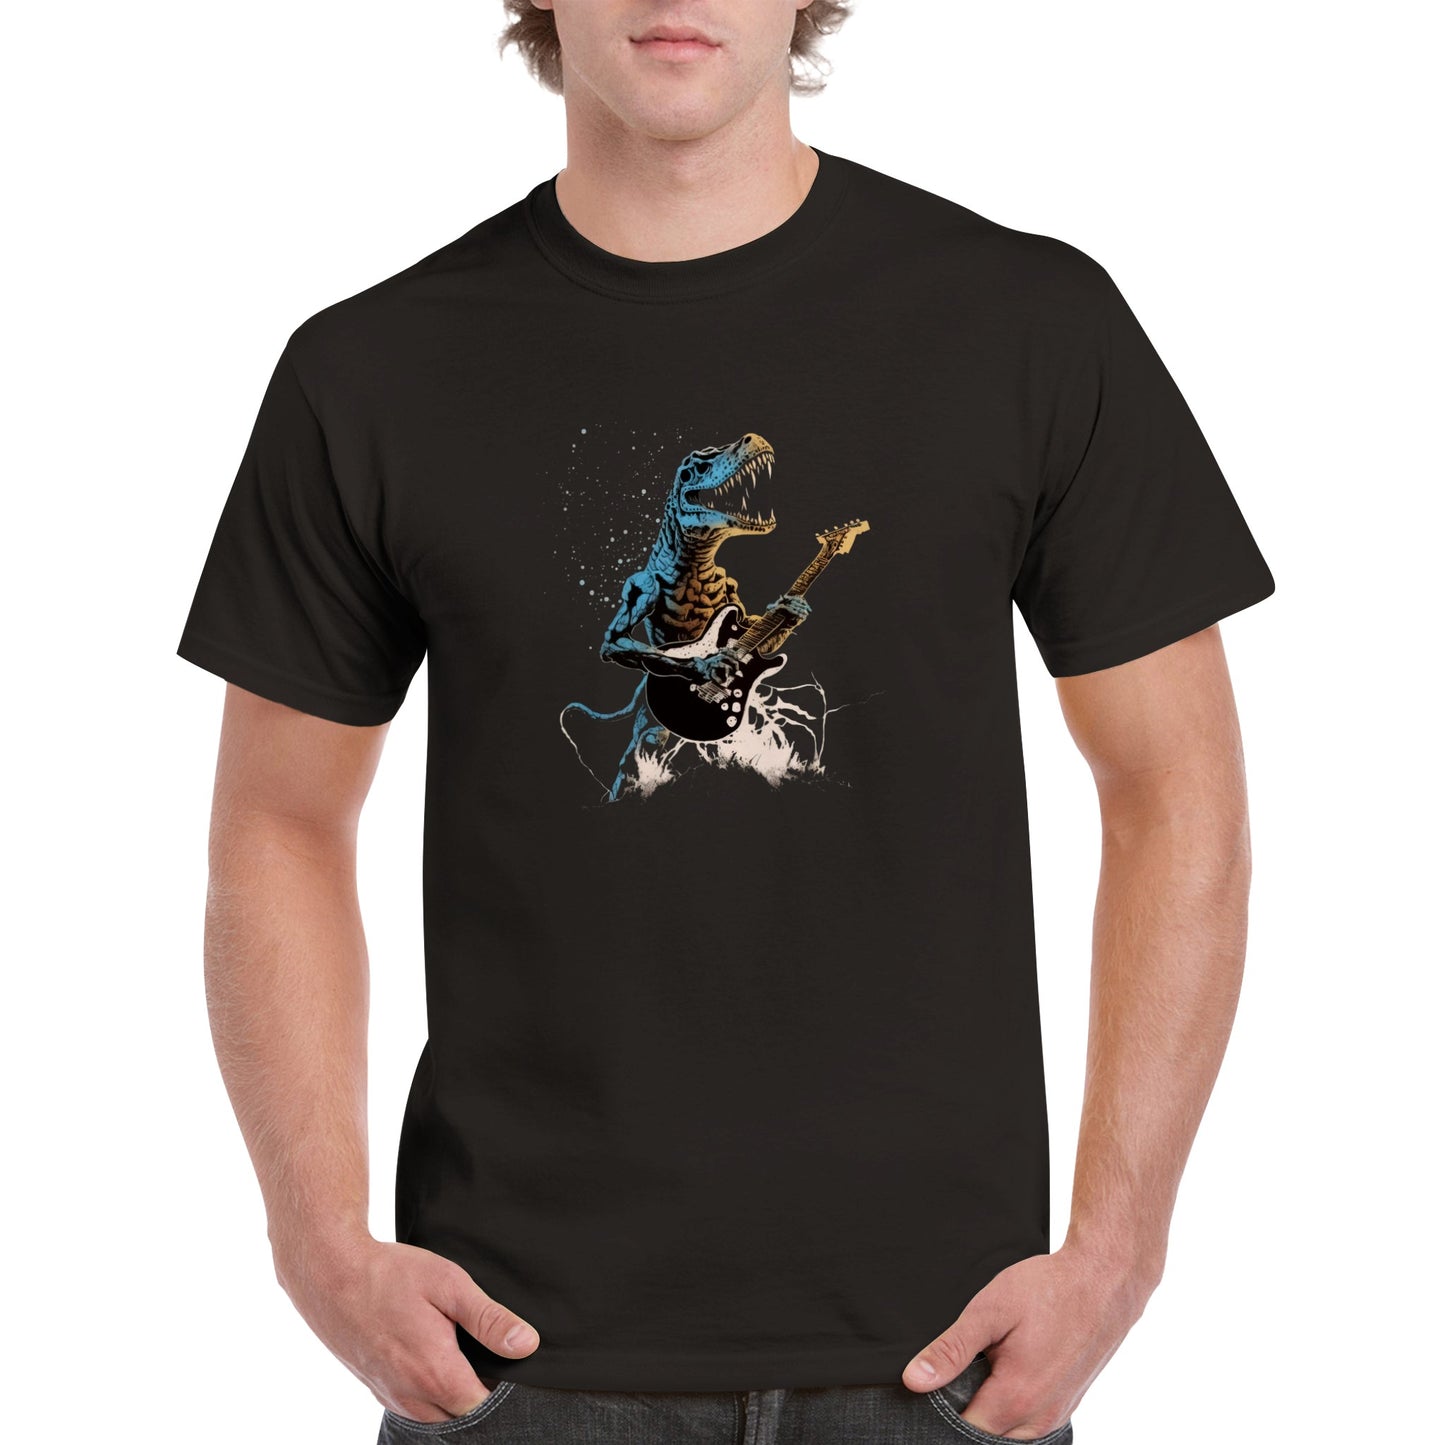 A guy wearing a black t-shirt with a t-rex shredding out on a guitar print